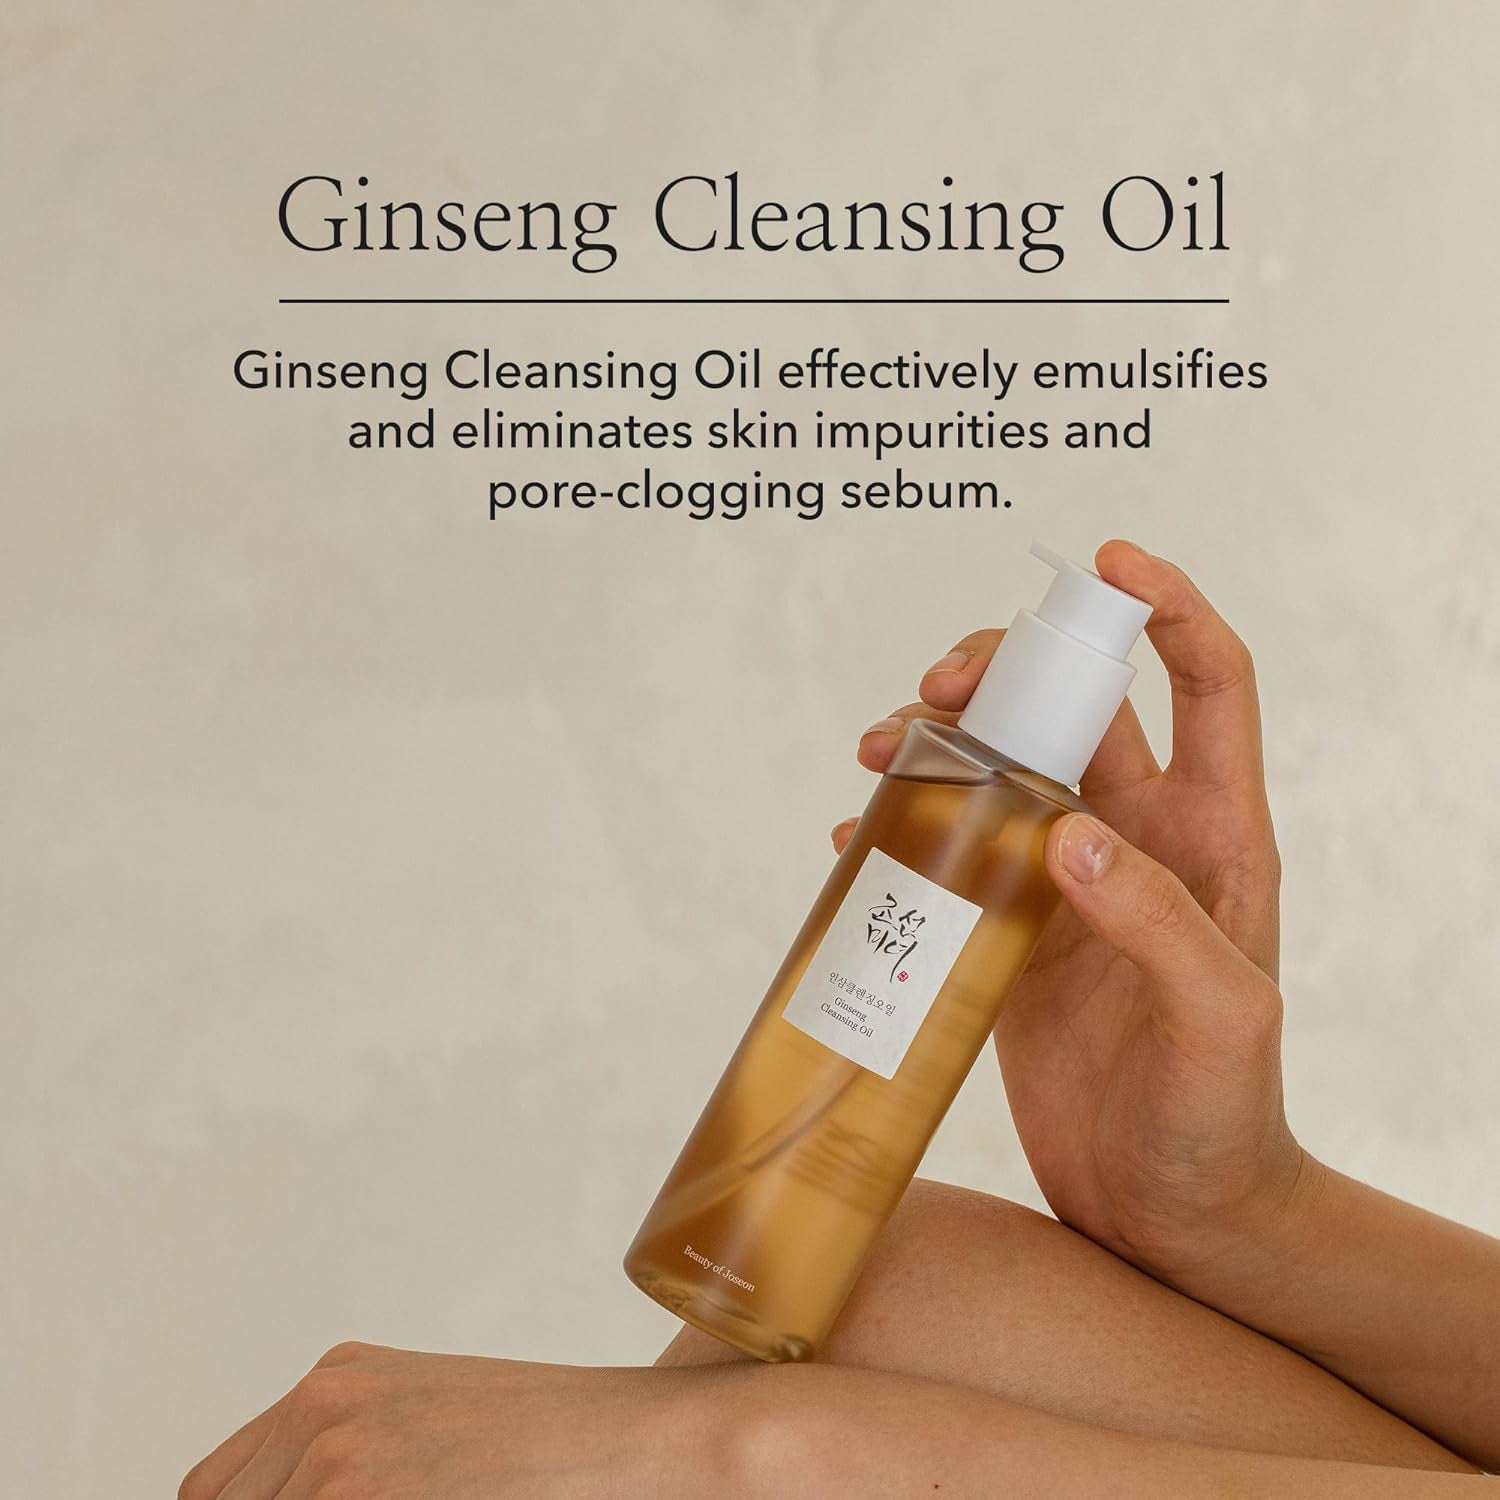 Beauty of Joseon Ginseng Cleansing Oil Waterproof Makeup Remover for Sensitive, Acne-Prone Facial Skin. Korean Skin Care for Men and Women, 210Ml, 7.1 Fl.Oz